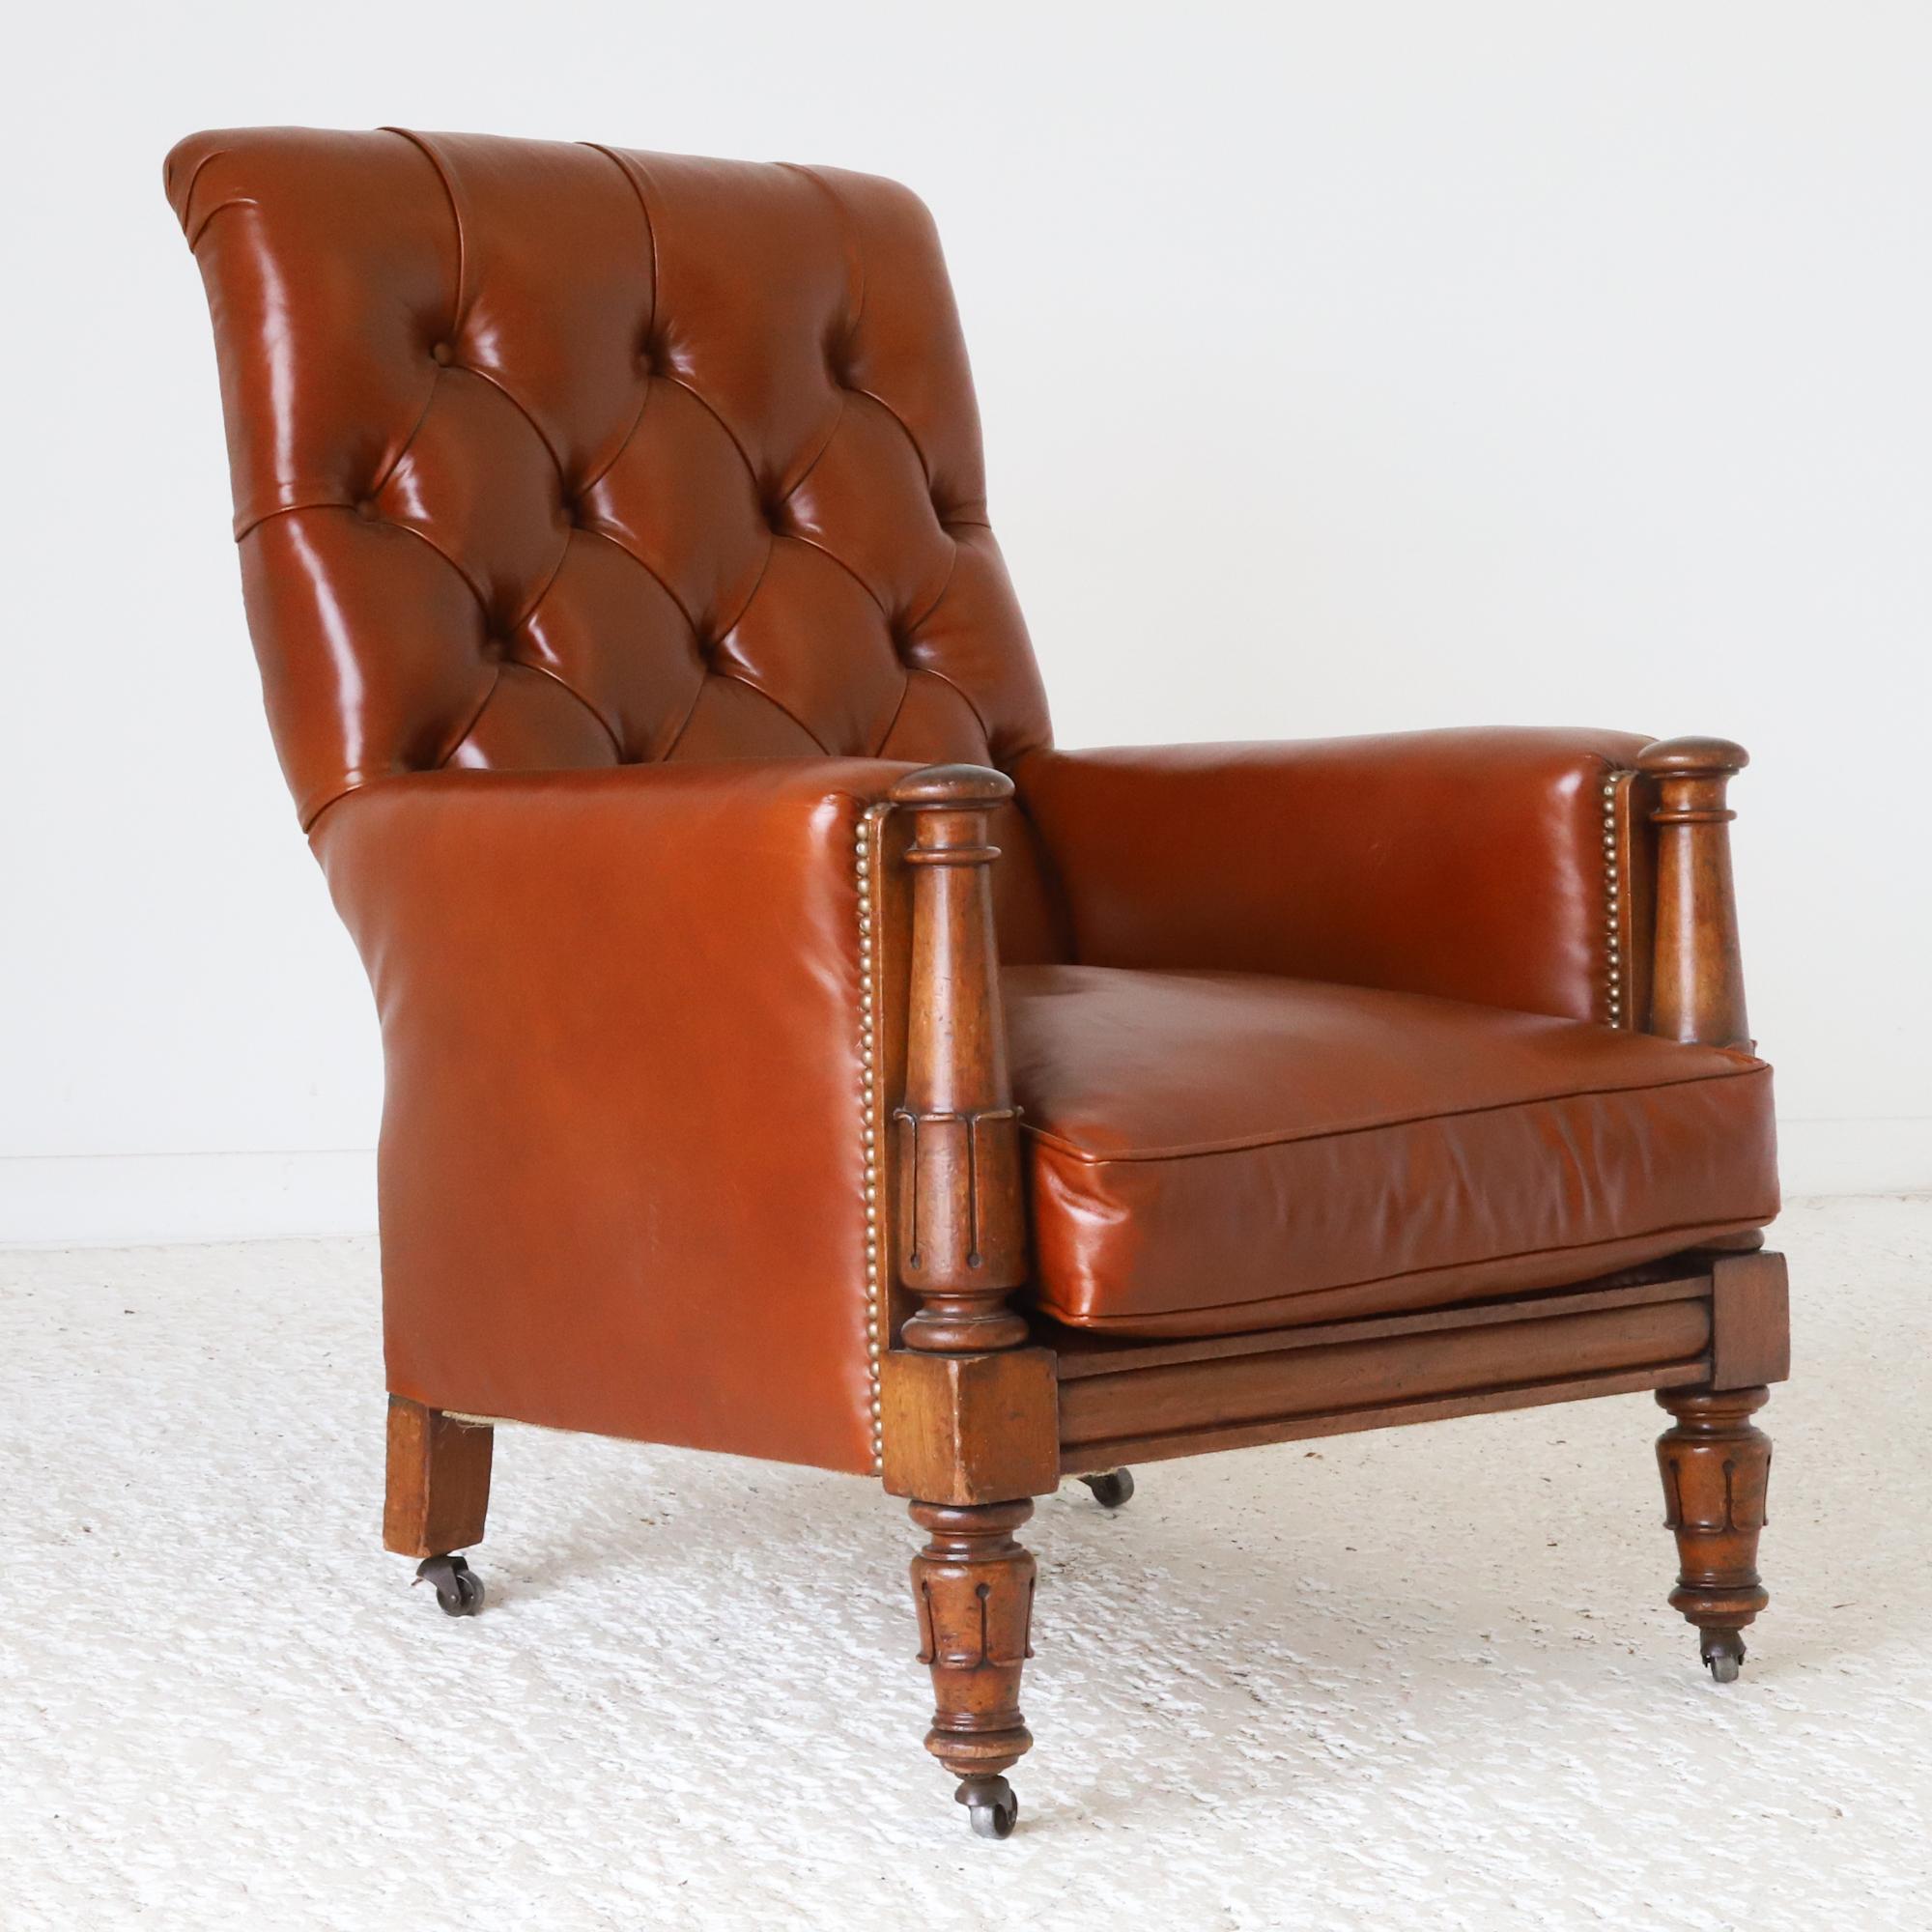 19th Century English c. 1830 Mahogany William IV Library Chair reupholstered in tan leather  For Sale